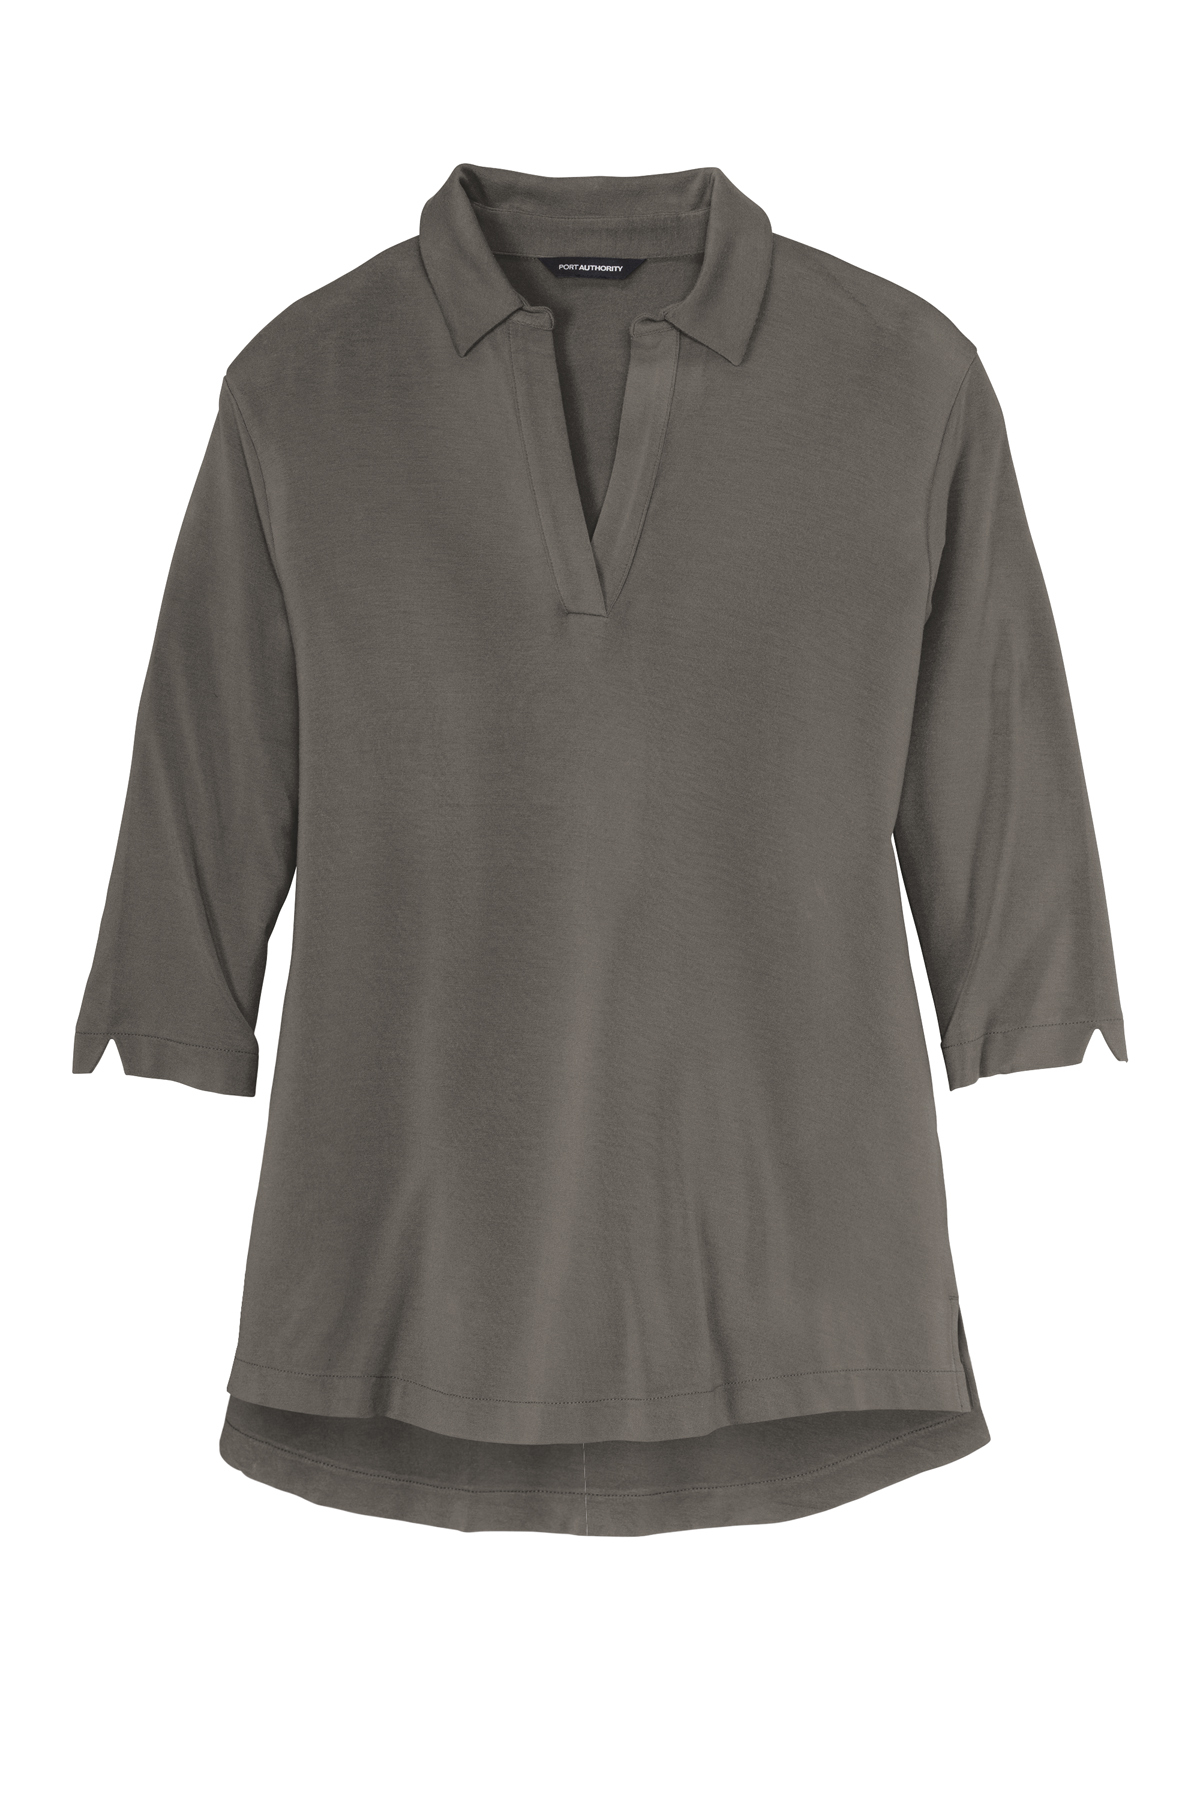 Authority Authority Ladies Tunic | Port | Knit Luxe Port Product